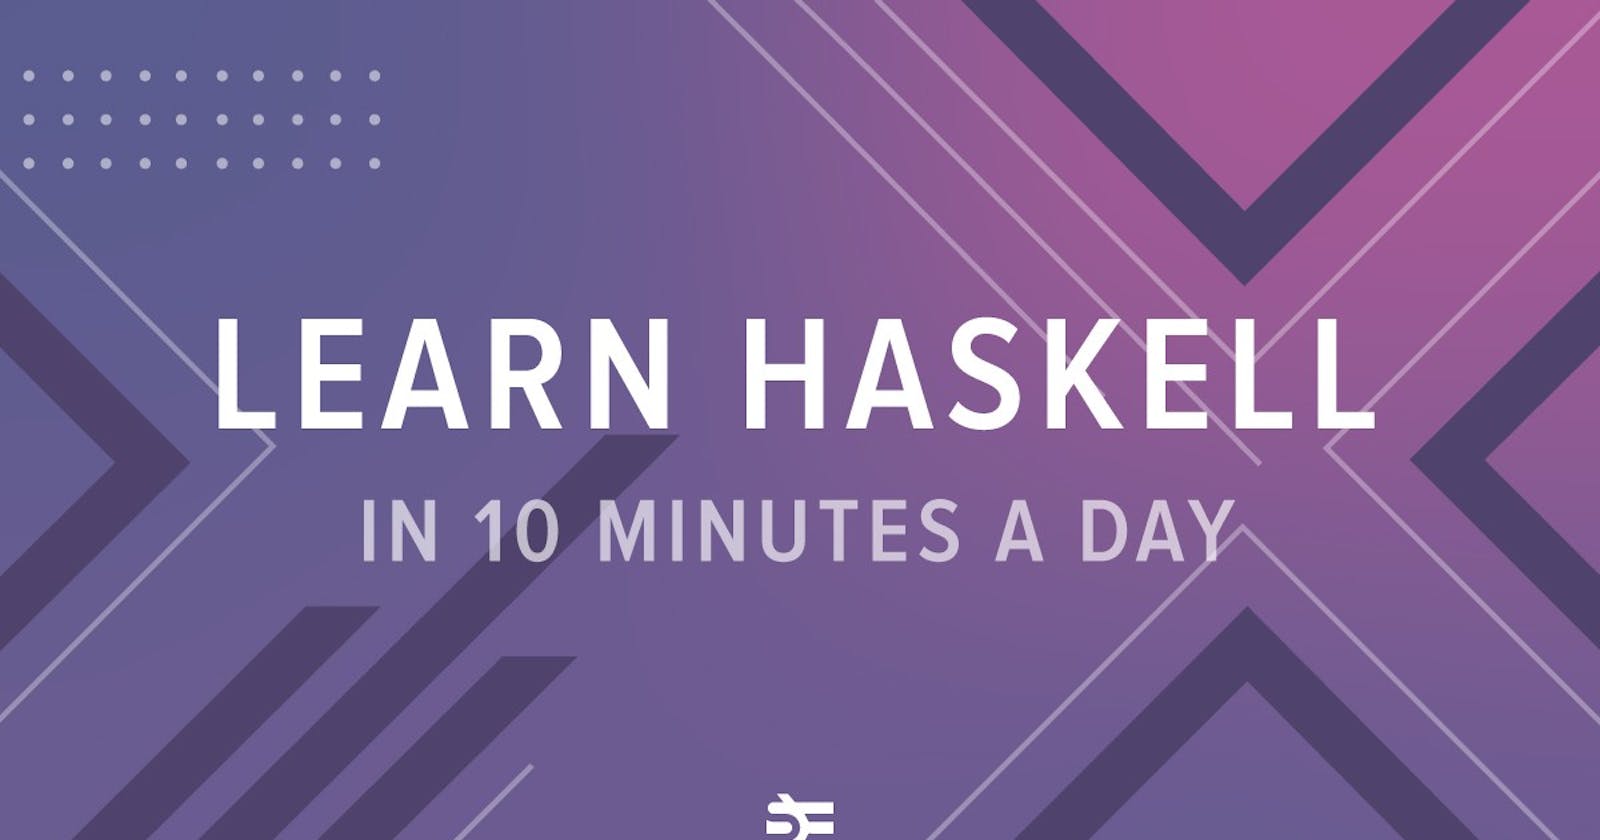 How to Learn Haskell in 10 Minutes a Day